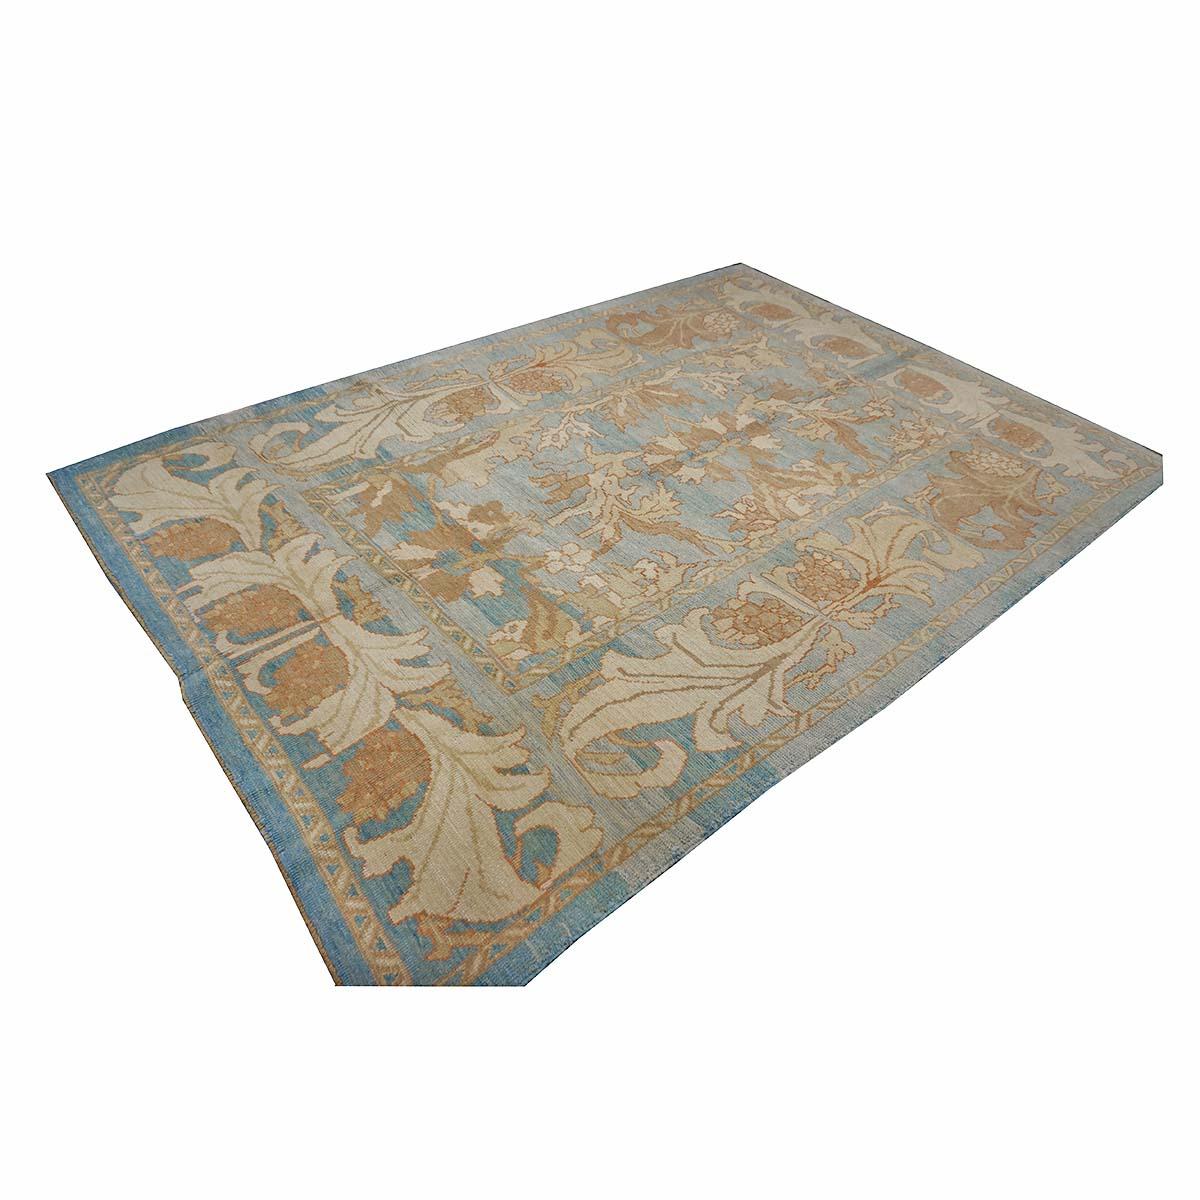 21st Century Turkish Donegal Oushak 8x11 Blue, Ivory, & Clay Handmade Area Rug For Sale 1